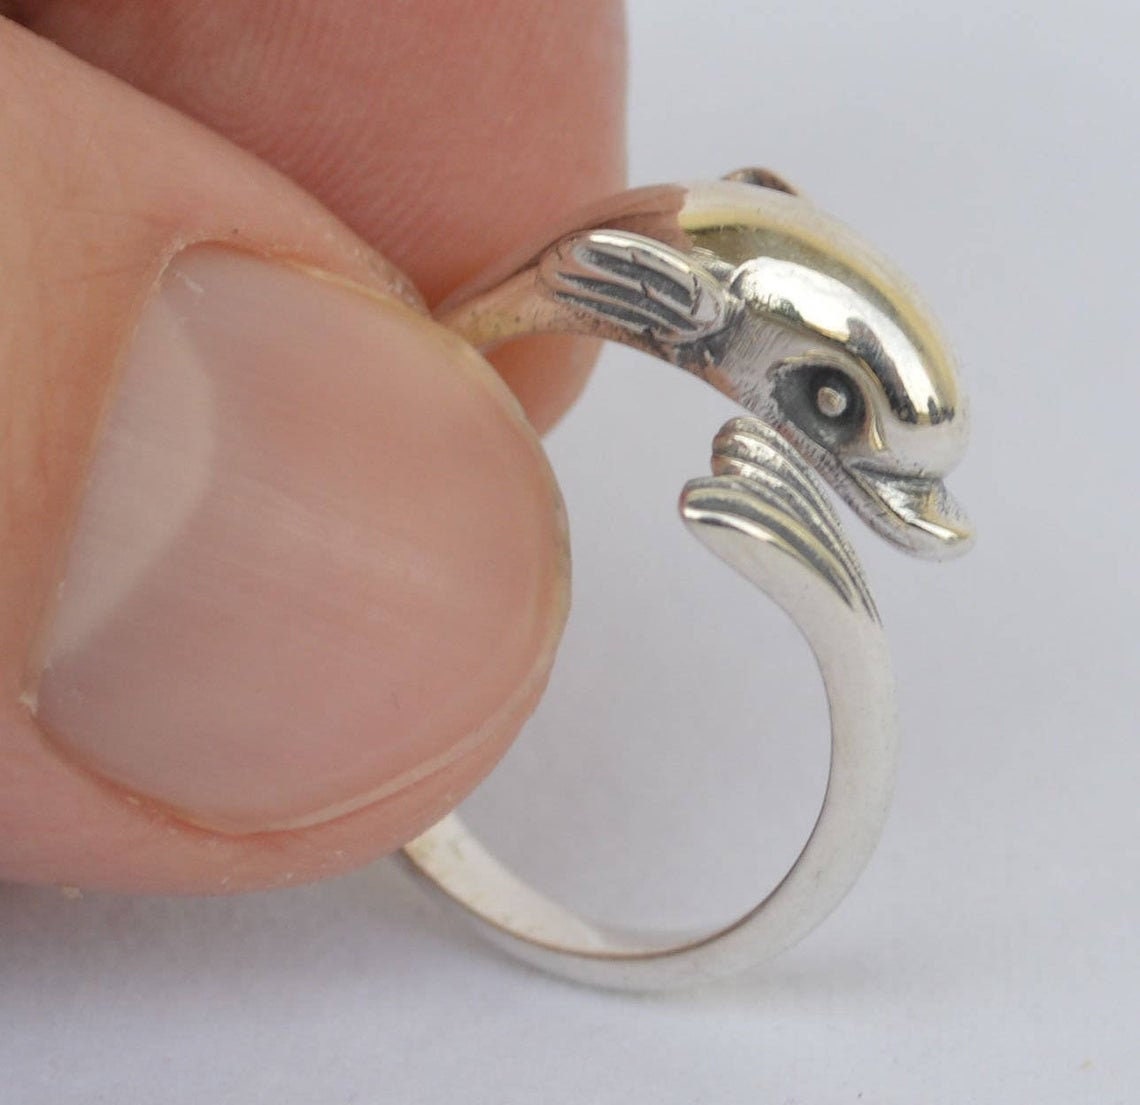 Dolphin - Symbol of Freedom, Protection and Good Luck - Ring - Size Between Us 6 to 8 1/2 - 925 Sterling Silver